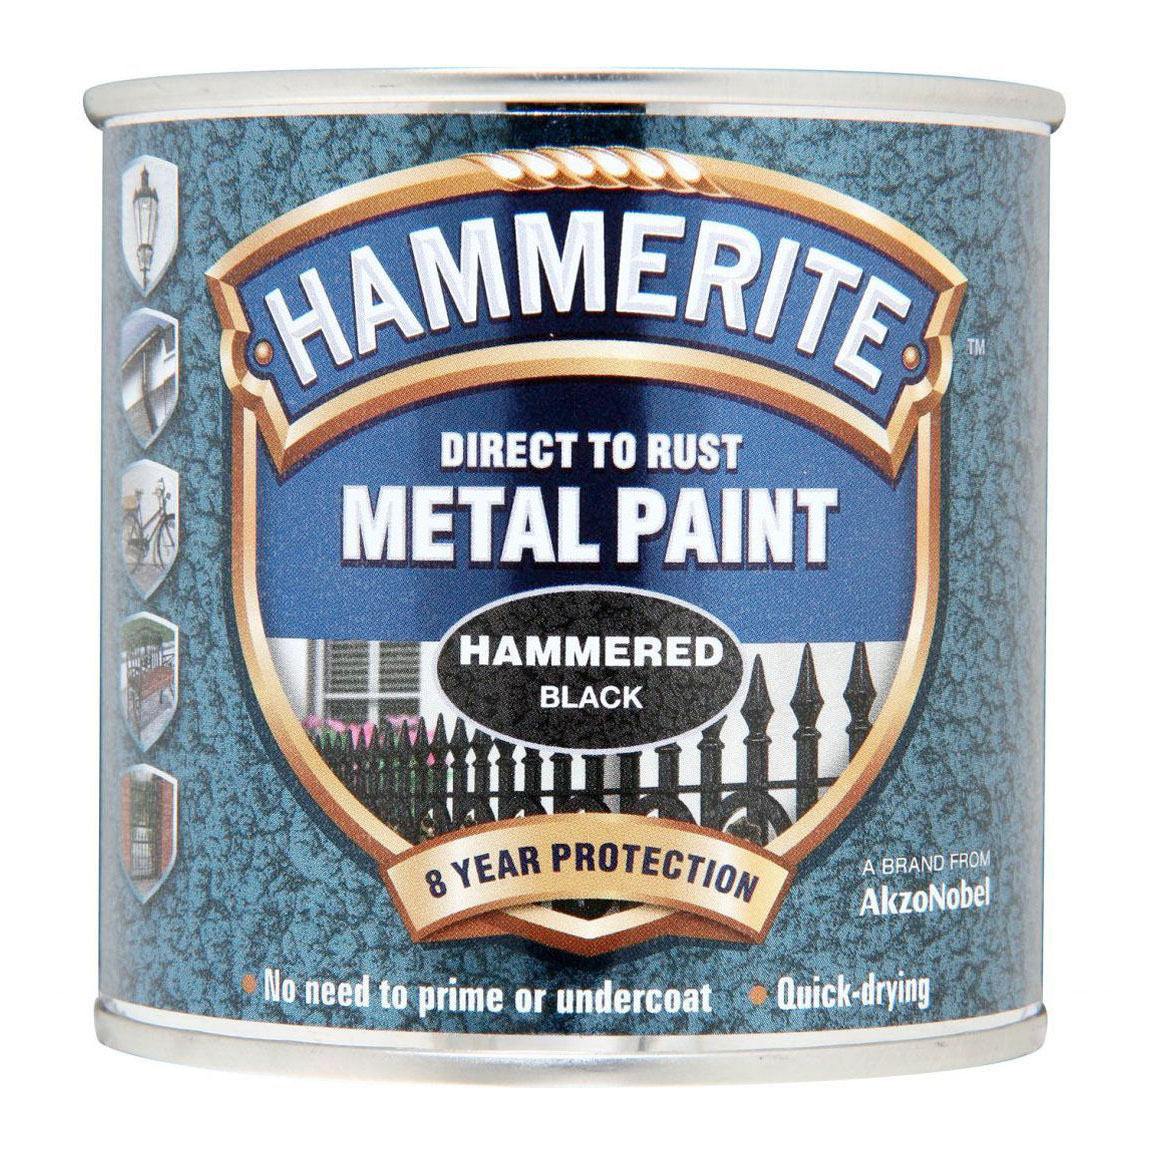 Hammerite Direct to Rust Metal Paint Hammered Black 250ml-Metal Protection & Paint-Tool Factory